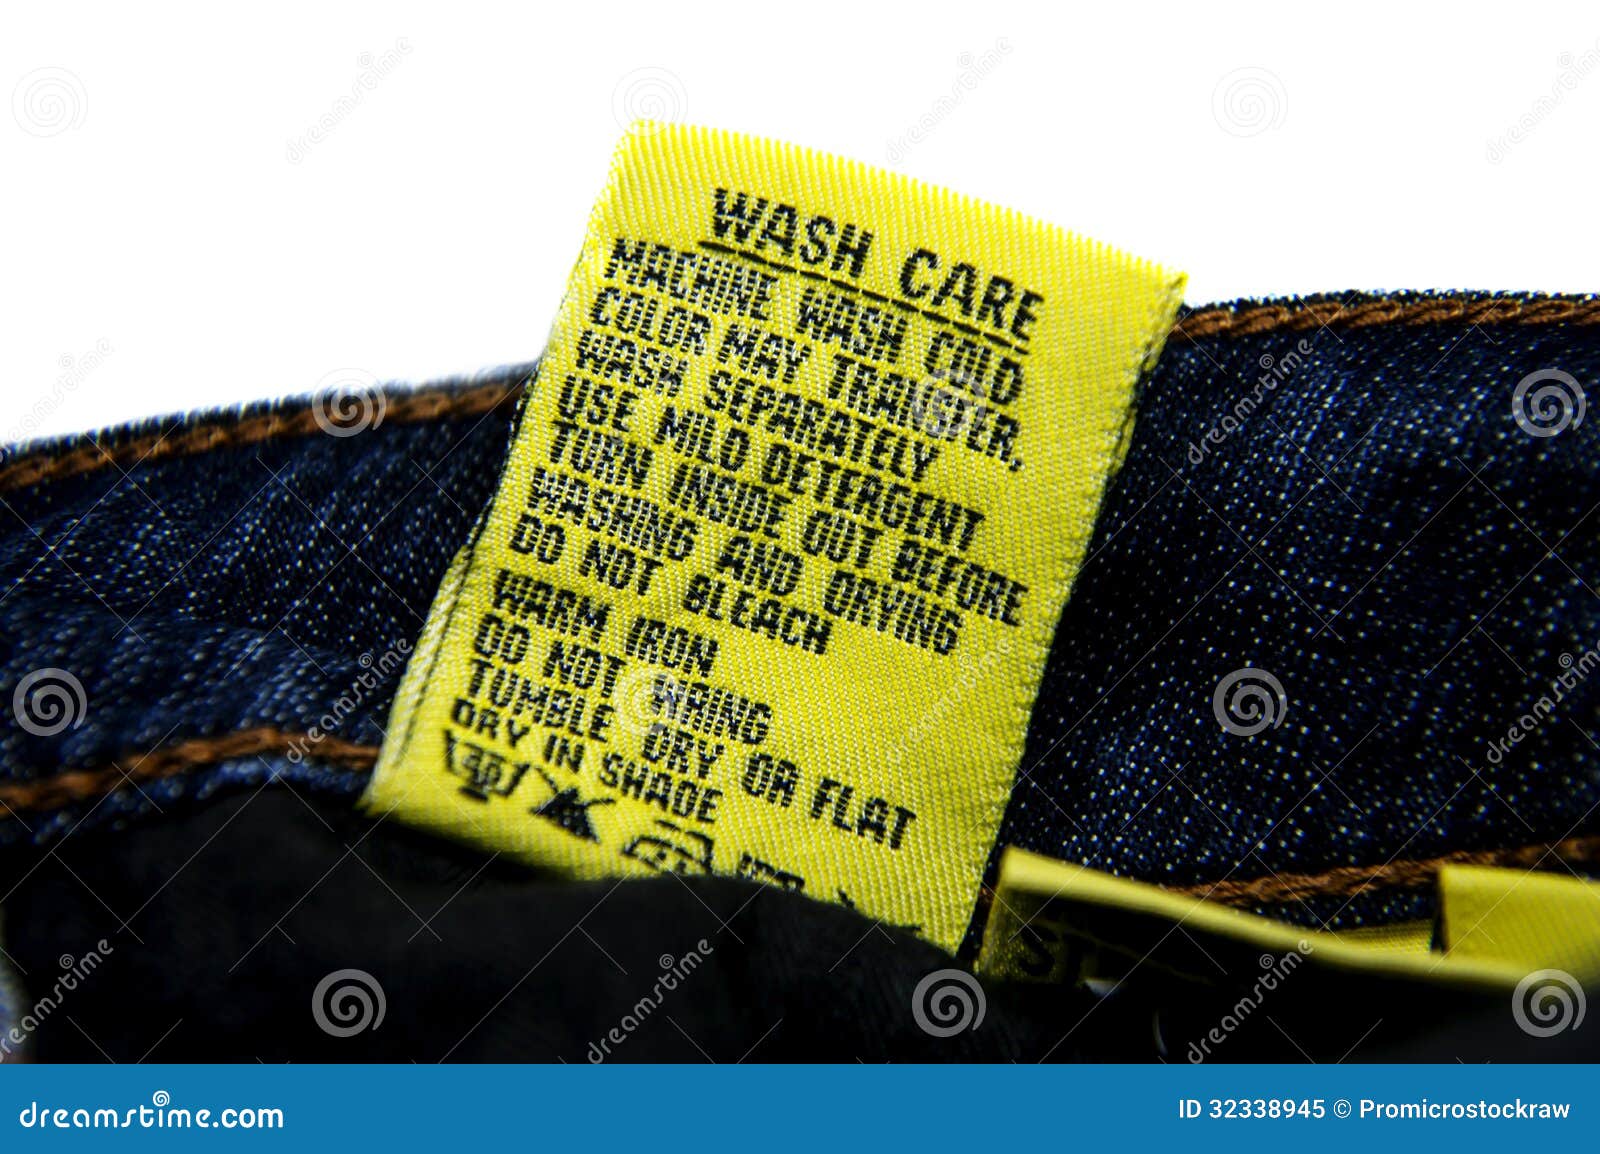 Washing Jeans Instructions stock image. Image of detail - 32338945